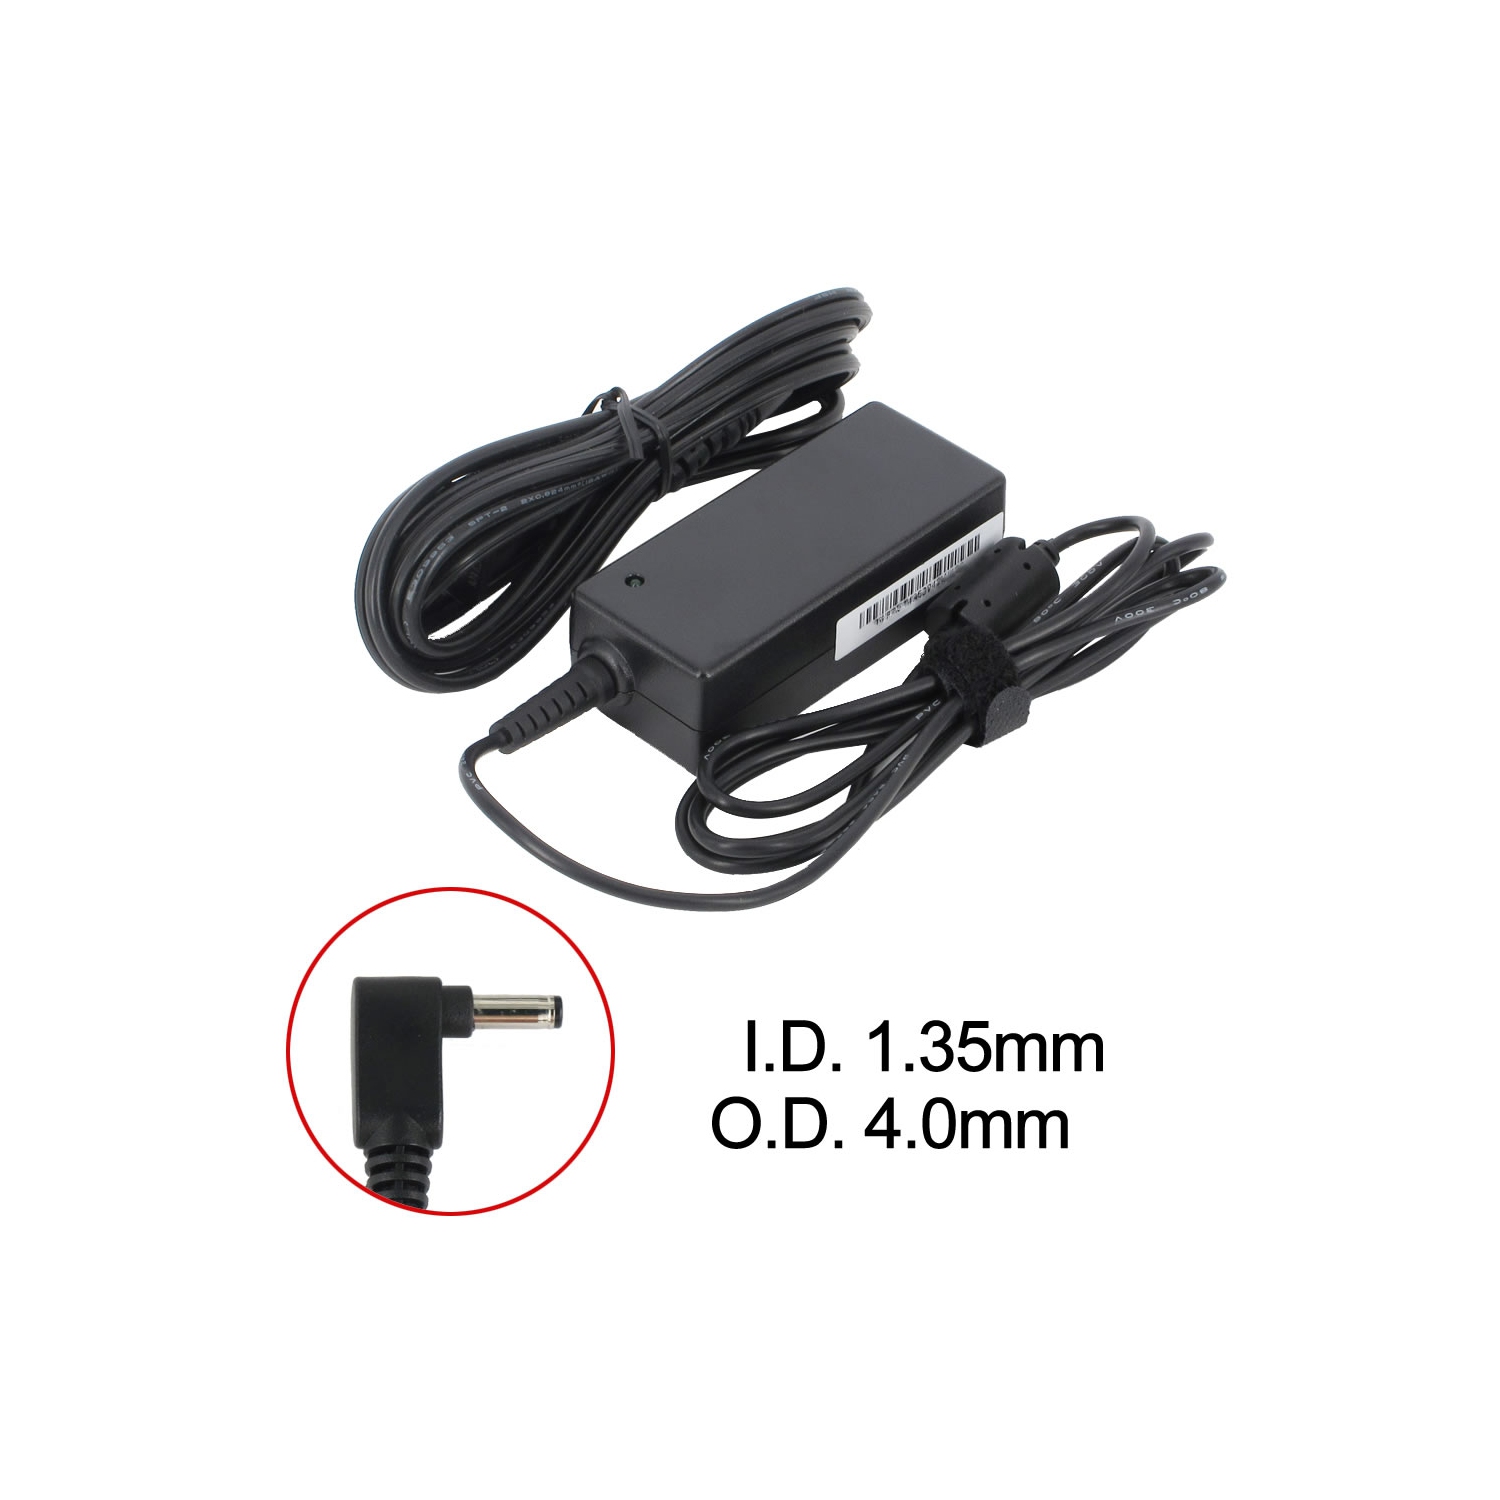 BattDepot: New Laptop AC Adapter for Asus VivoBook X441SA-1C, 0A001-00230300, 0A001-00233100, EXA1206CH, W15-065N1A